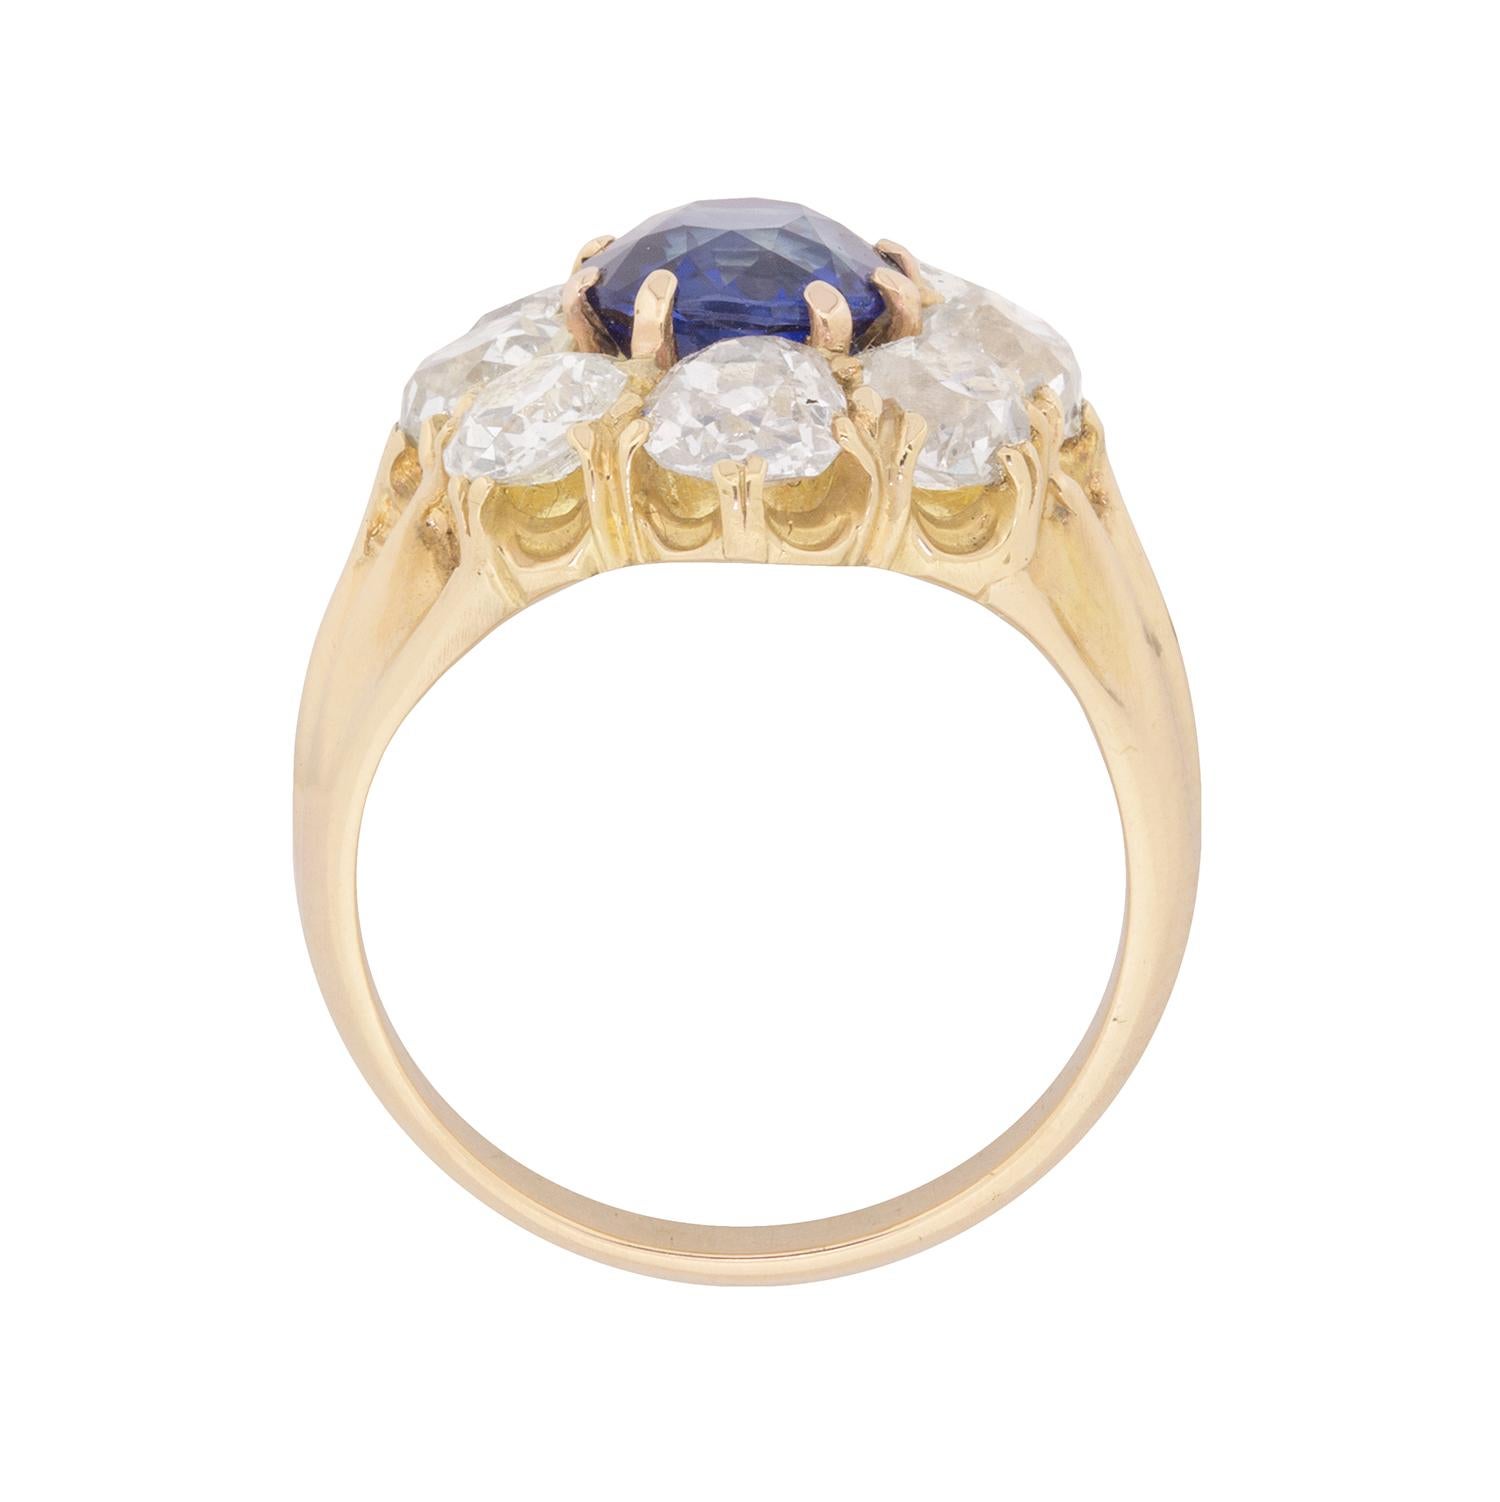 This stunning Victorian cluster ring features a beautiful deep blue sapphire in the centre. It is a natural stone, with no evidence of treatment, weighing 2.18 carat. It is haloed by a ring of hand cut, old cut diamond s, which total 4.00 carat.